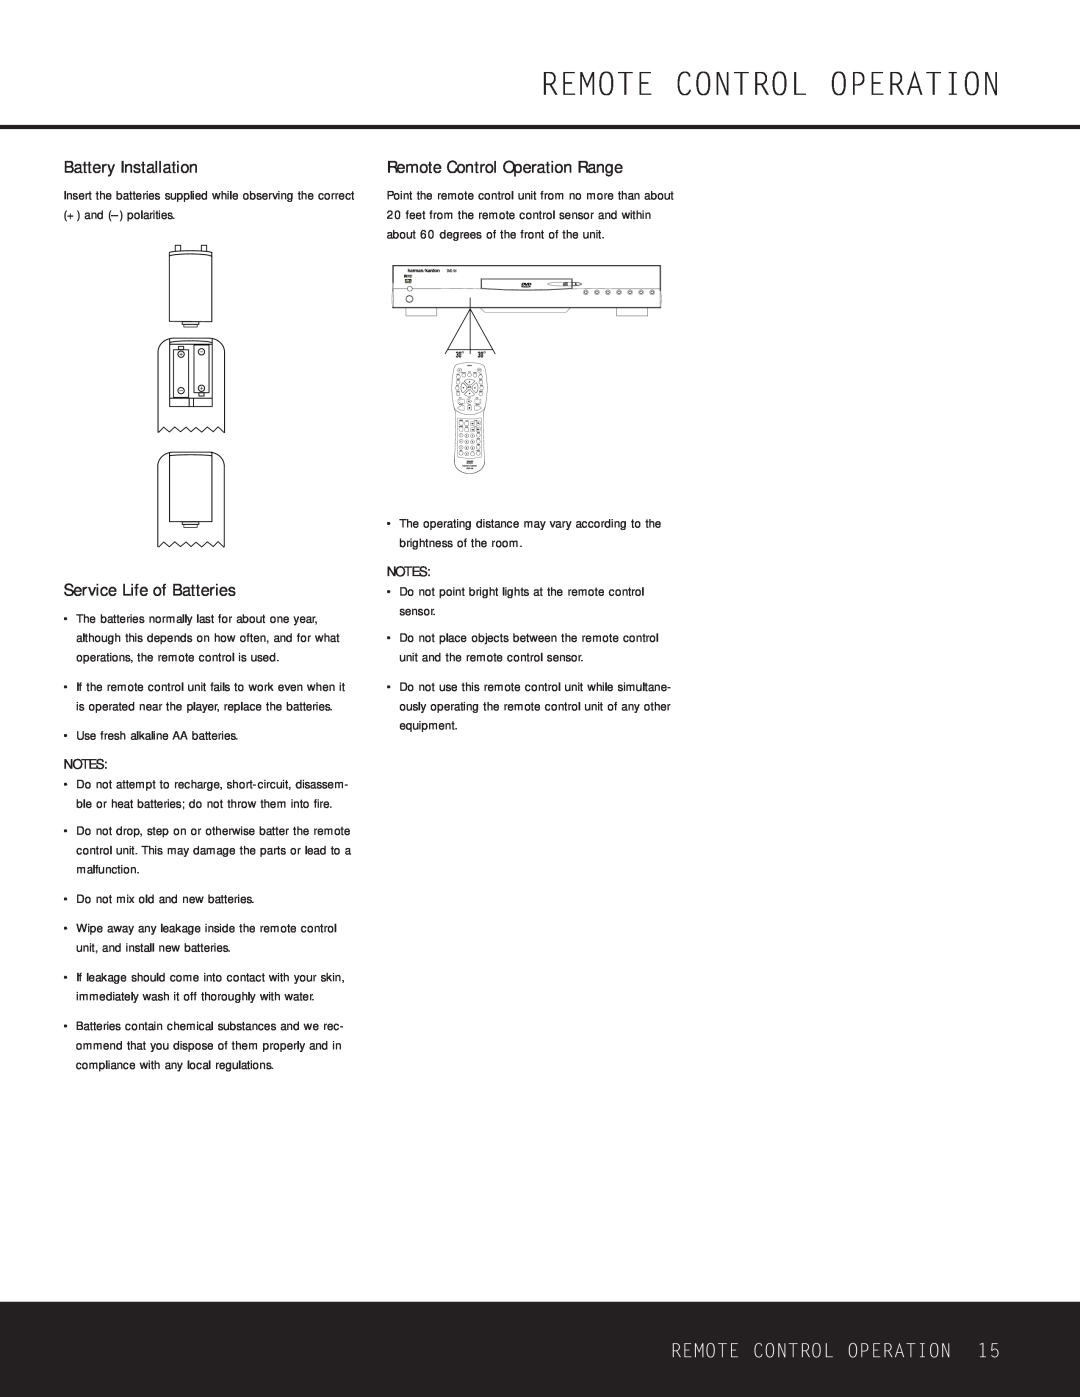 Harman-Kardon WLD8.810.119-1 Remote Control Operation, Battery Installation, Service Life of Batteries, + and - polarities 